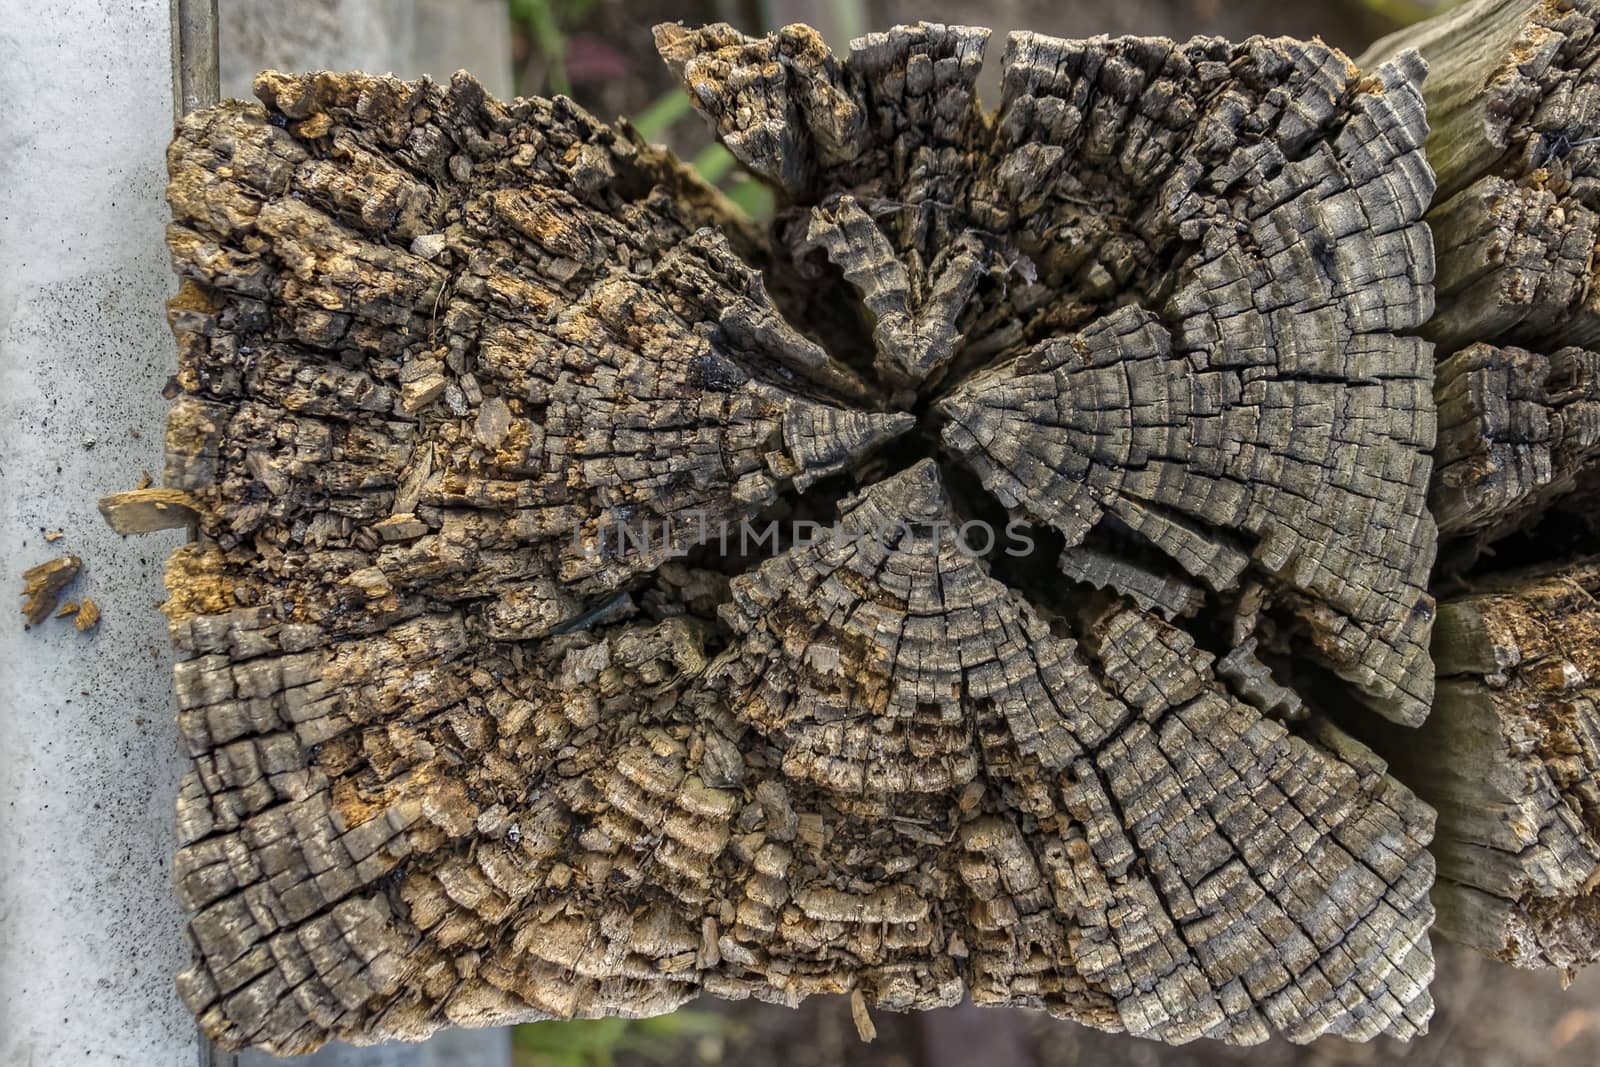 The top of worn, wooden post.